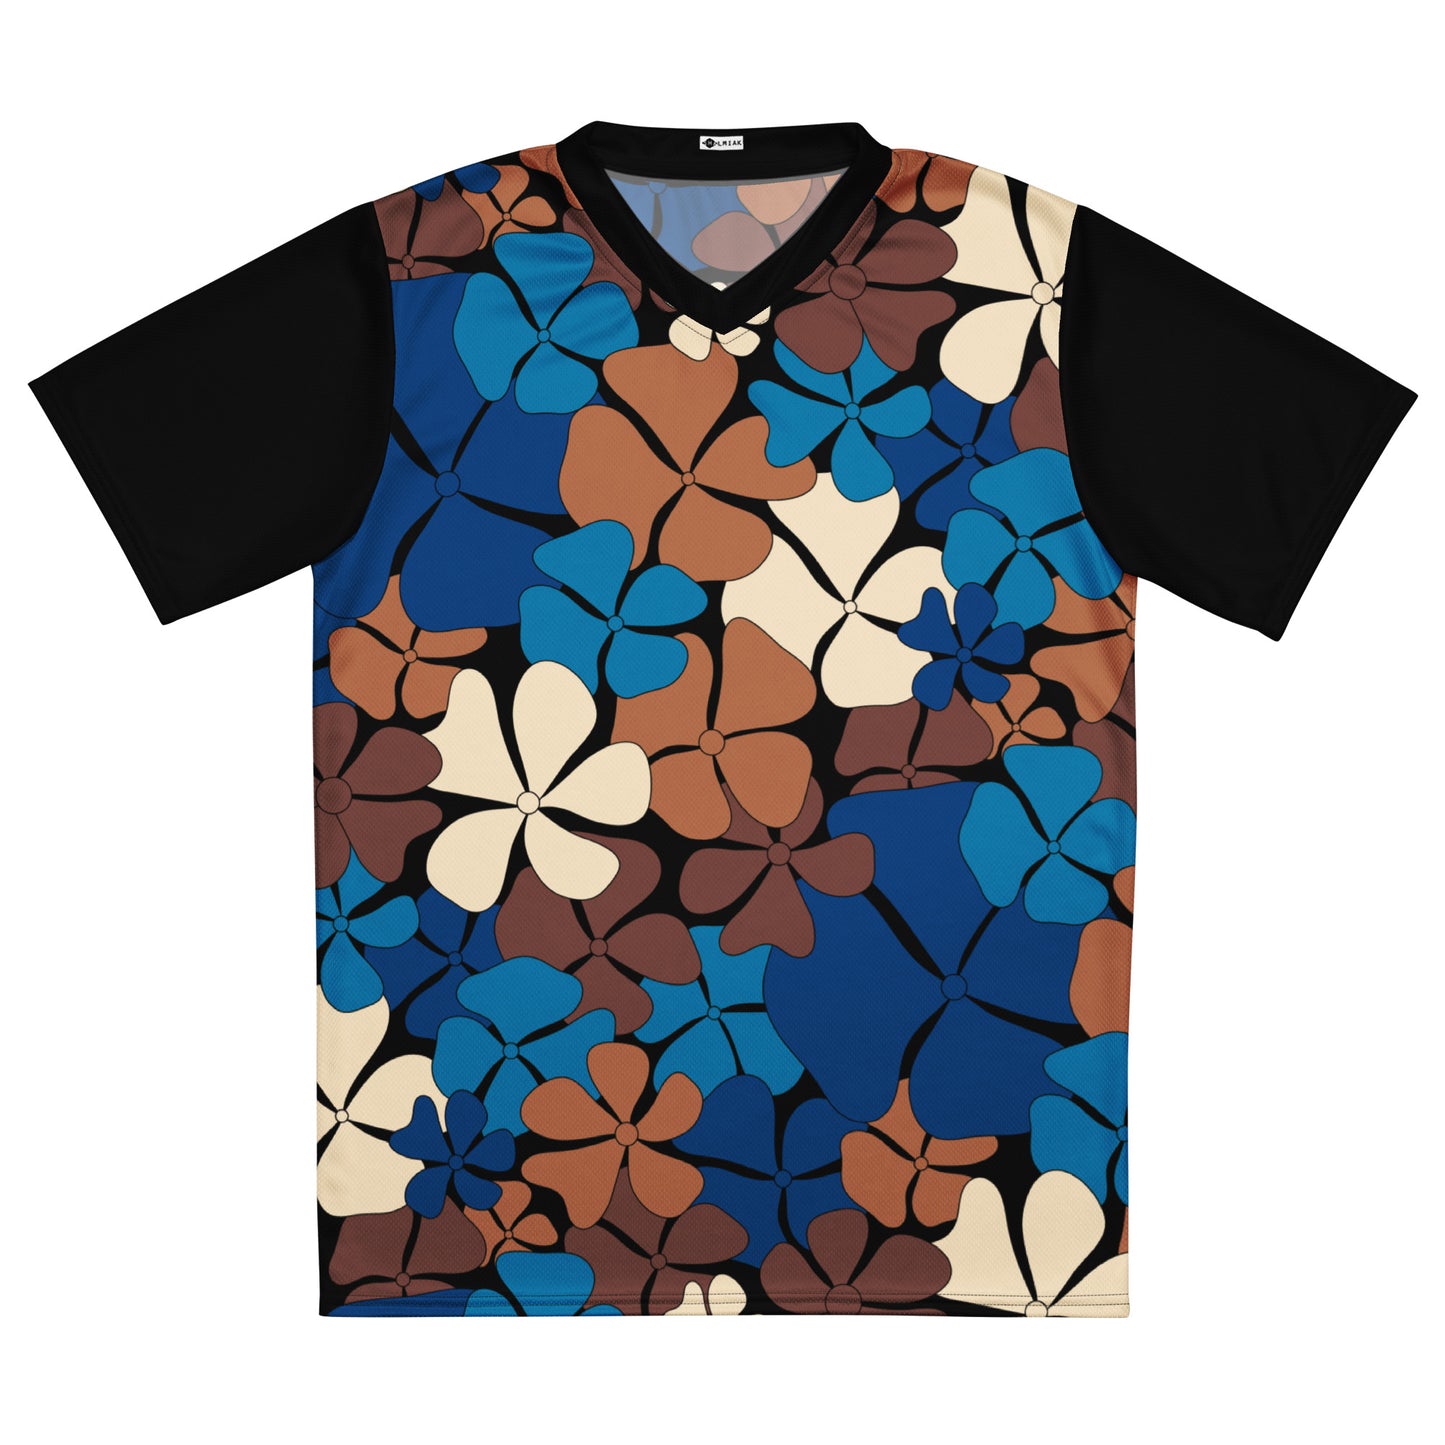 ADELIE blue brown - Recycled unisex sports jersey